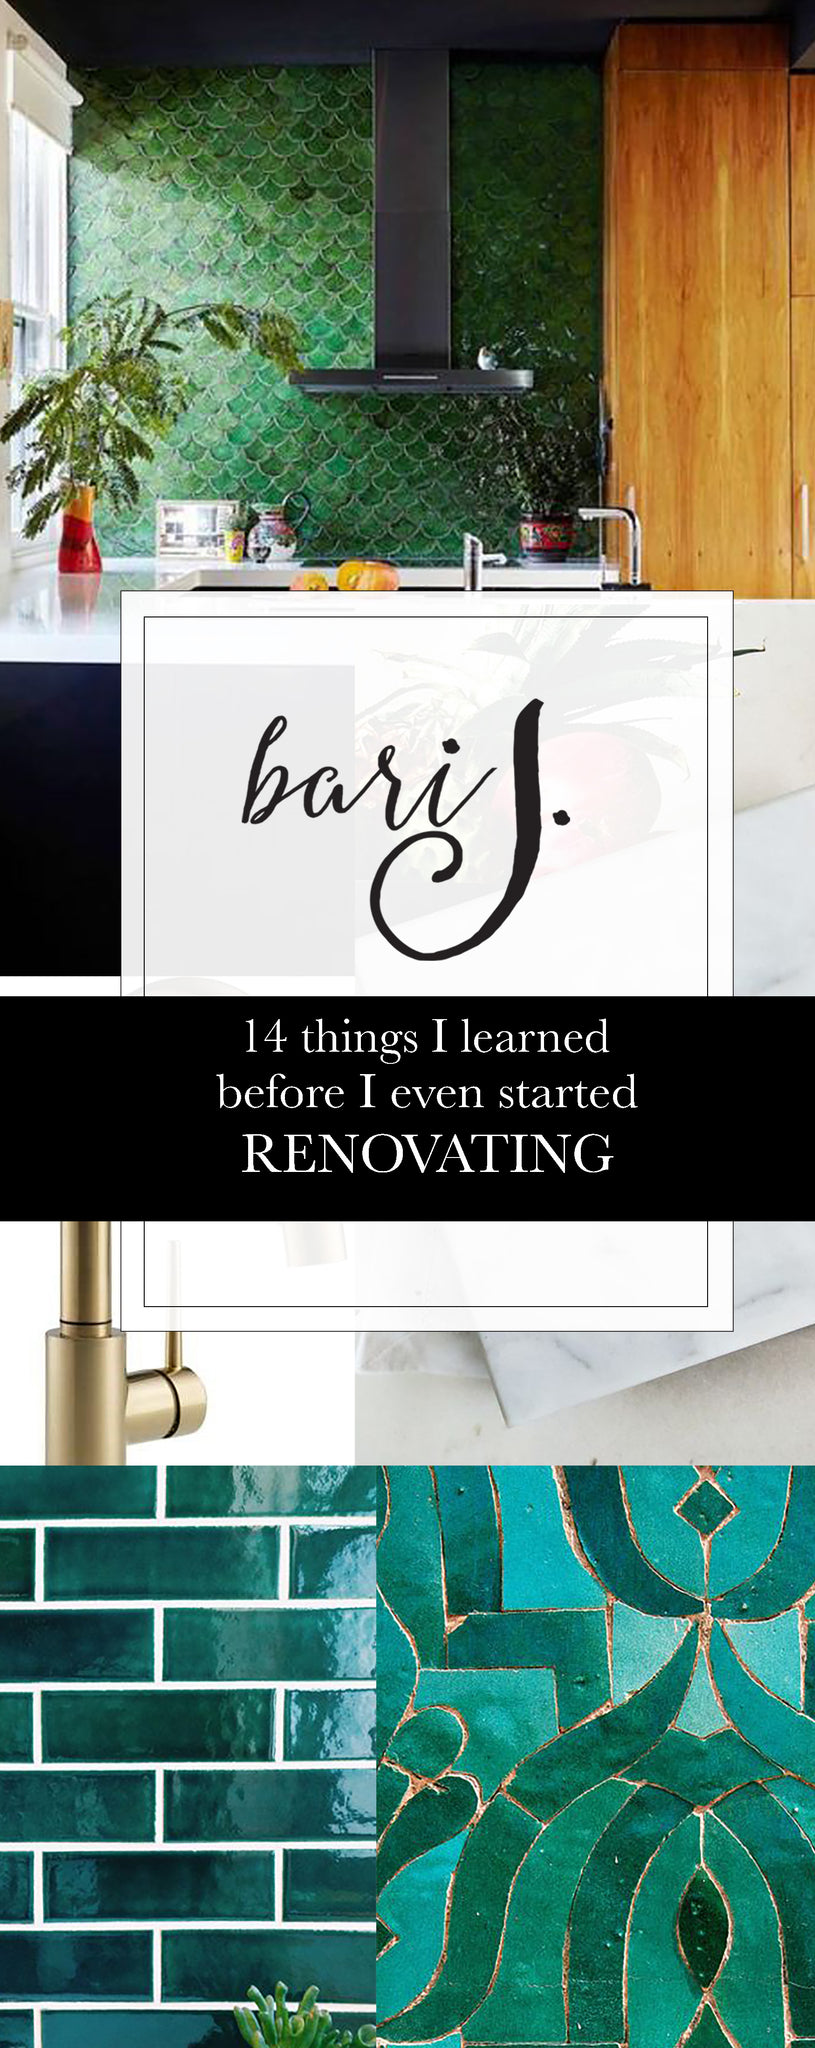 14 things I learned before I even started renovating